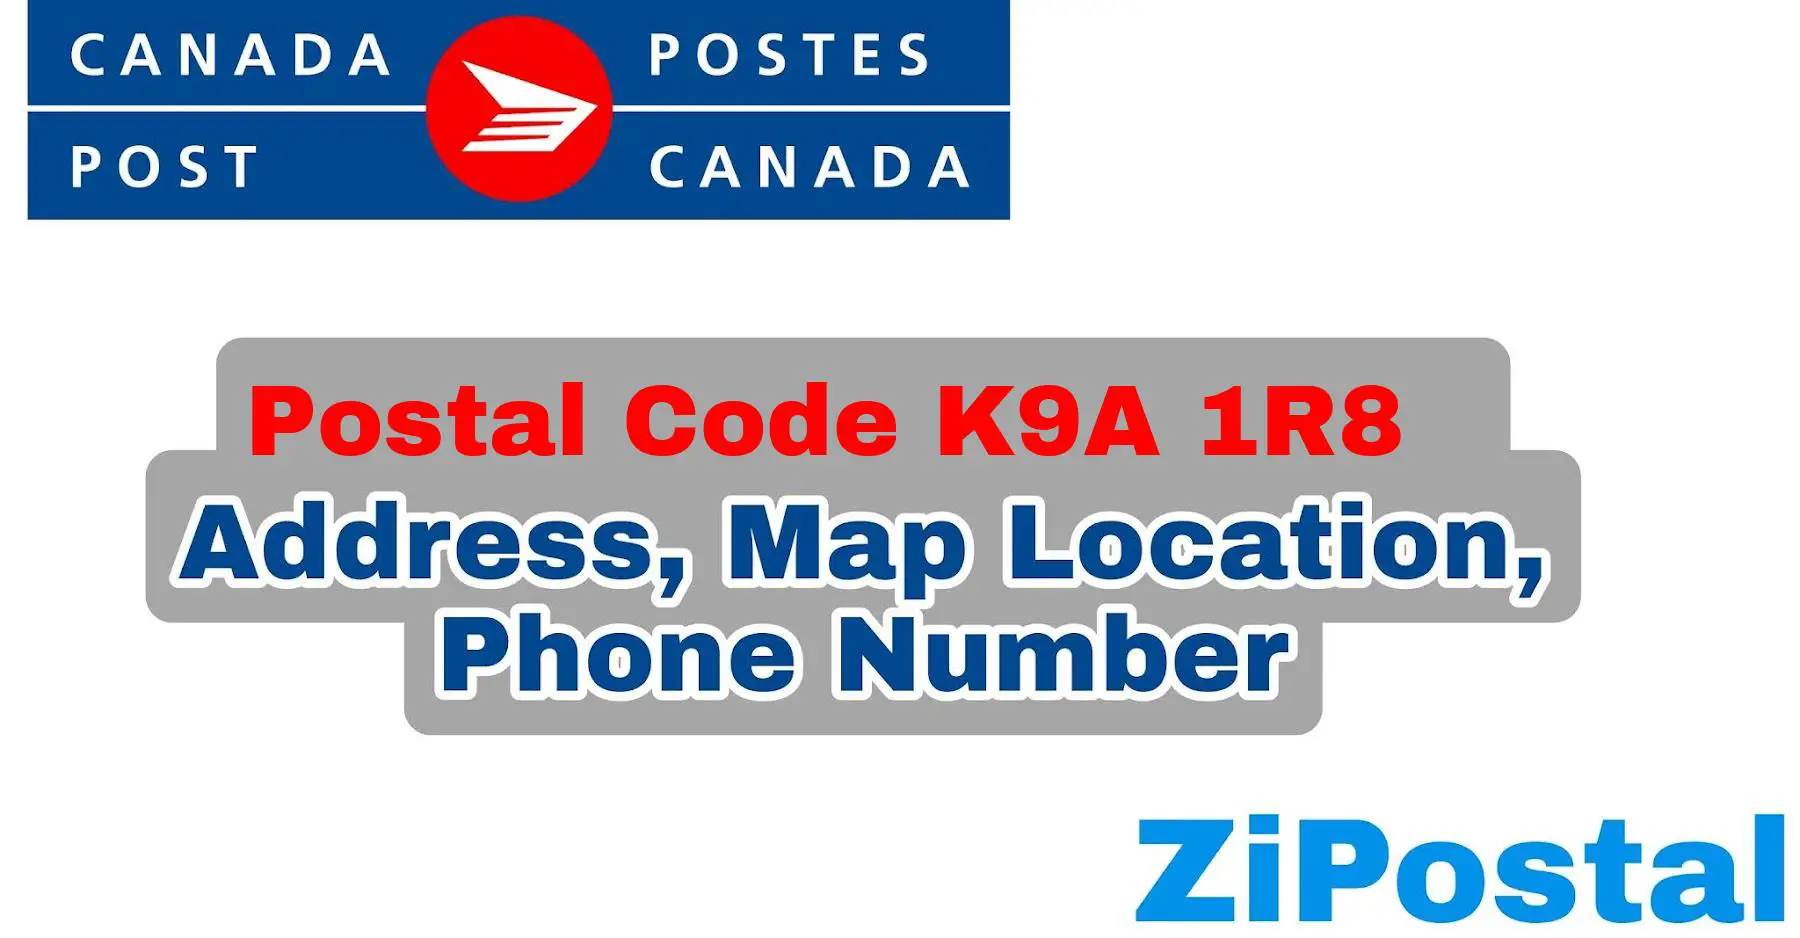 Postal Code K9A 1R8 Address Map Location and Phone Number